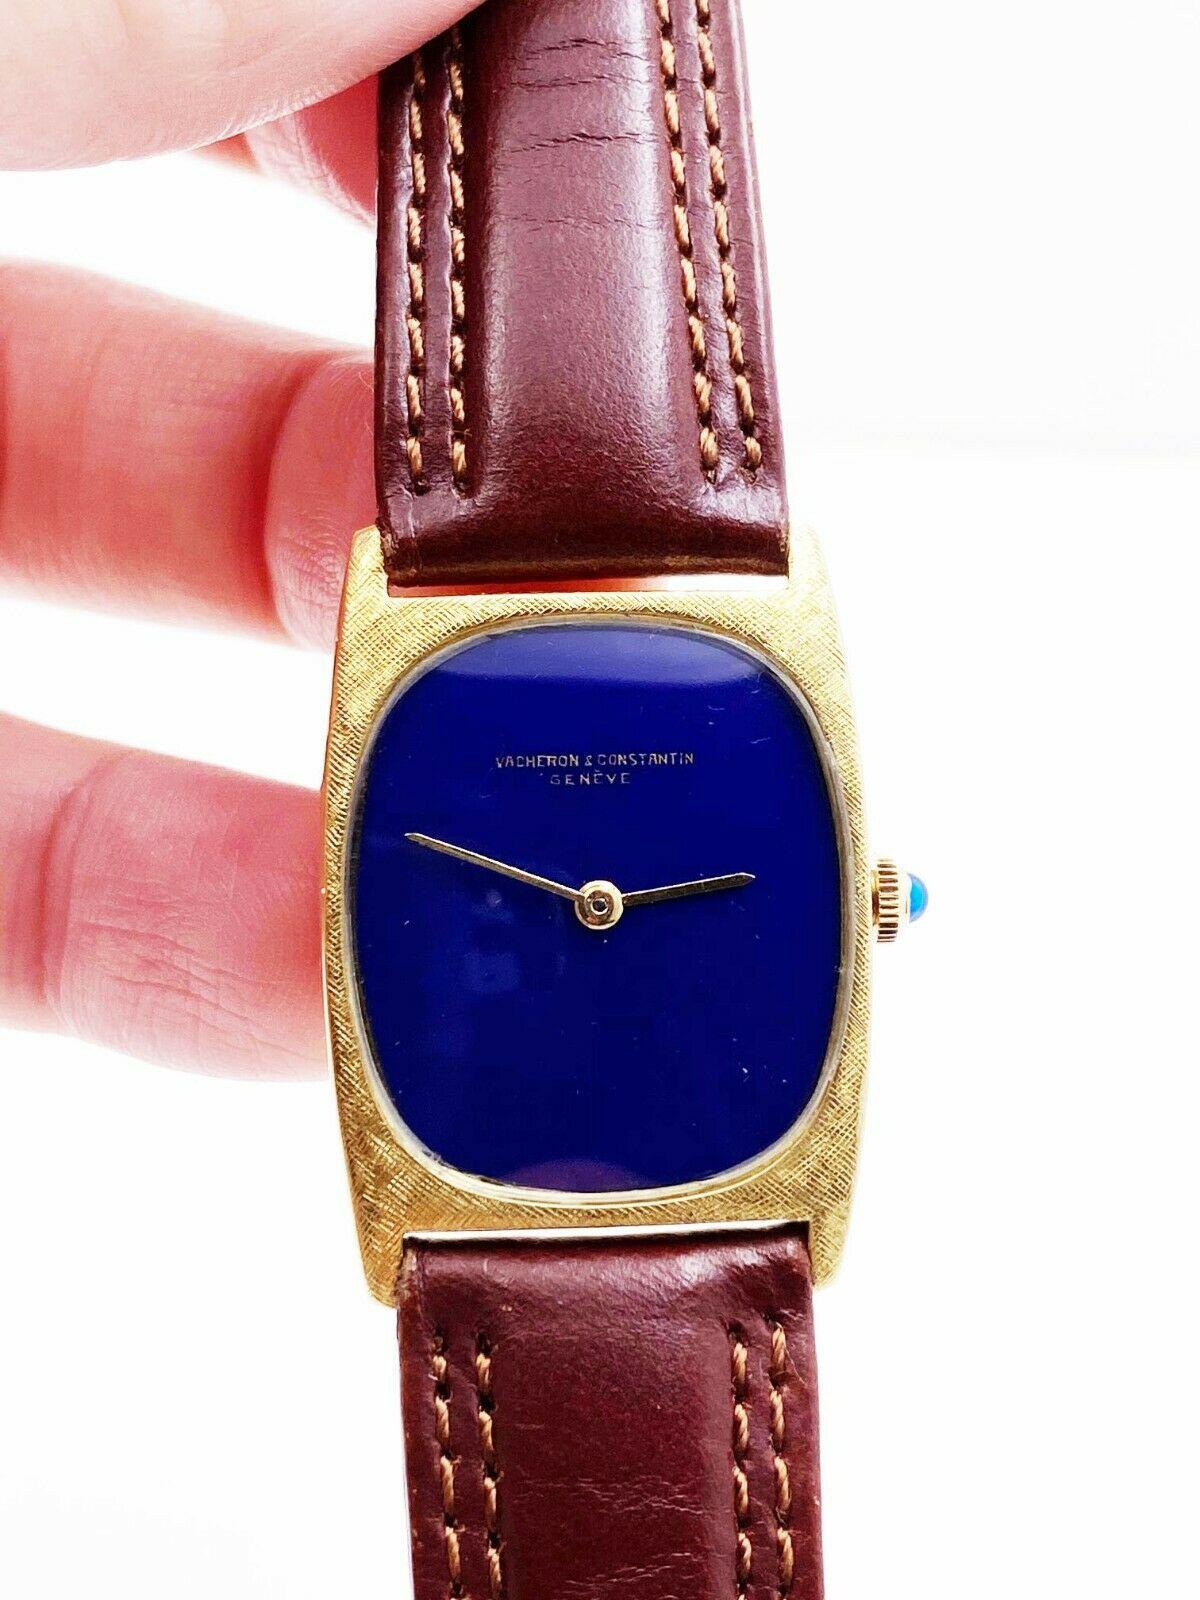 VERY RARE VINTAGE



Reference Number: 7813



Case Material:  18K Yellow Gold



Year: Estimated from the 80's

 

Band:  Custom Brown Leather 

 

Bezel: Yellow Gold

 

Dial: Lapis Lazuli 

  

Case Size: Approximately 25mm x 36mm

 

Includes: